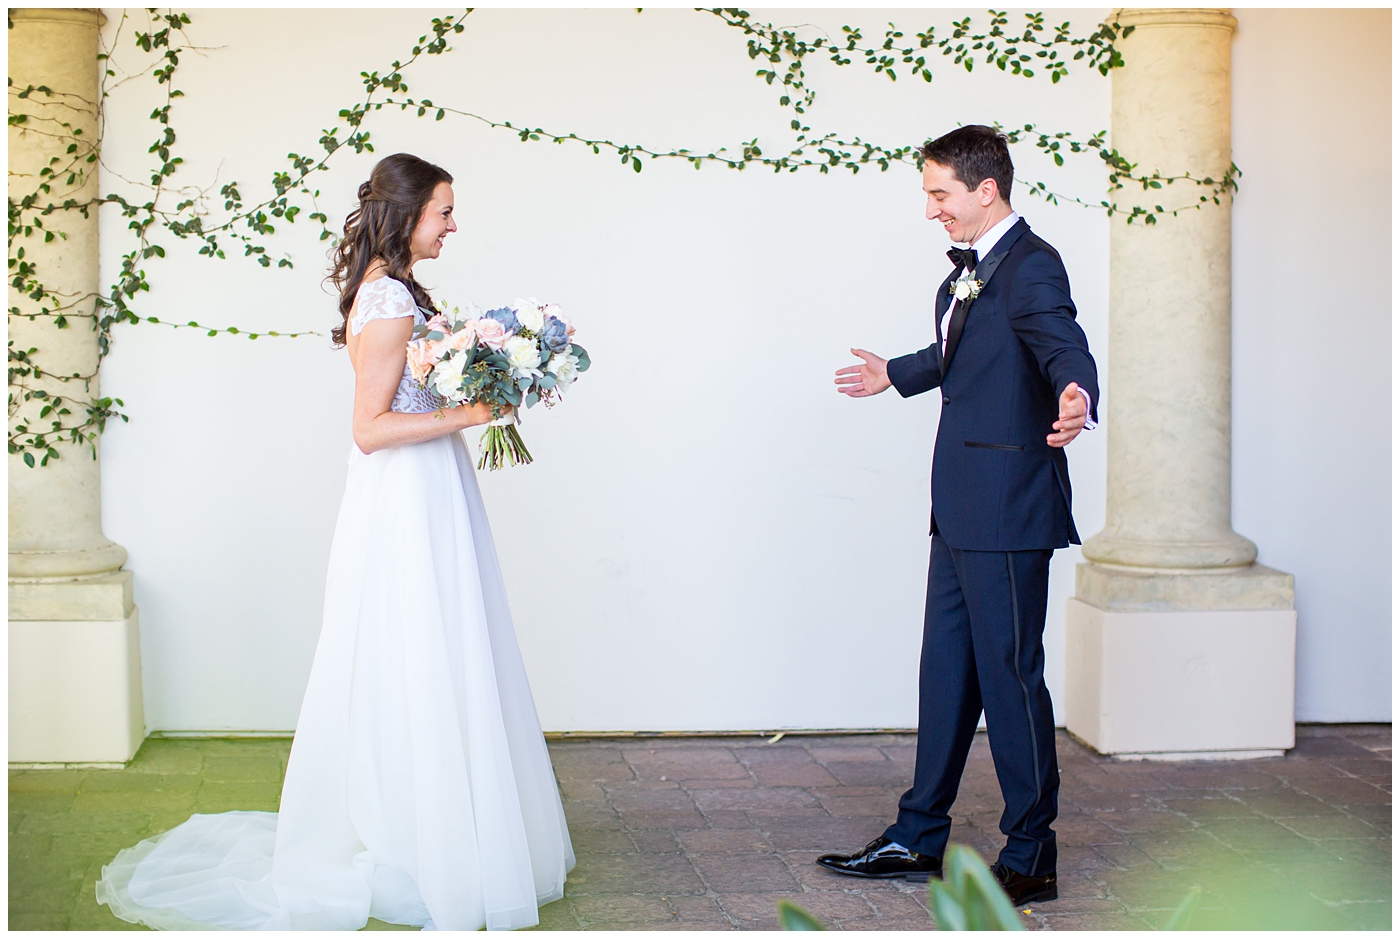 brunette bride in hayley paige wedding dress with cap sleeves with unique bouquet with succulents, white roses, peach peonies, and greenery with groom in dark blue and black tux with bowtie and white peony and succulent boutonniere wedding day first look